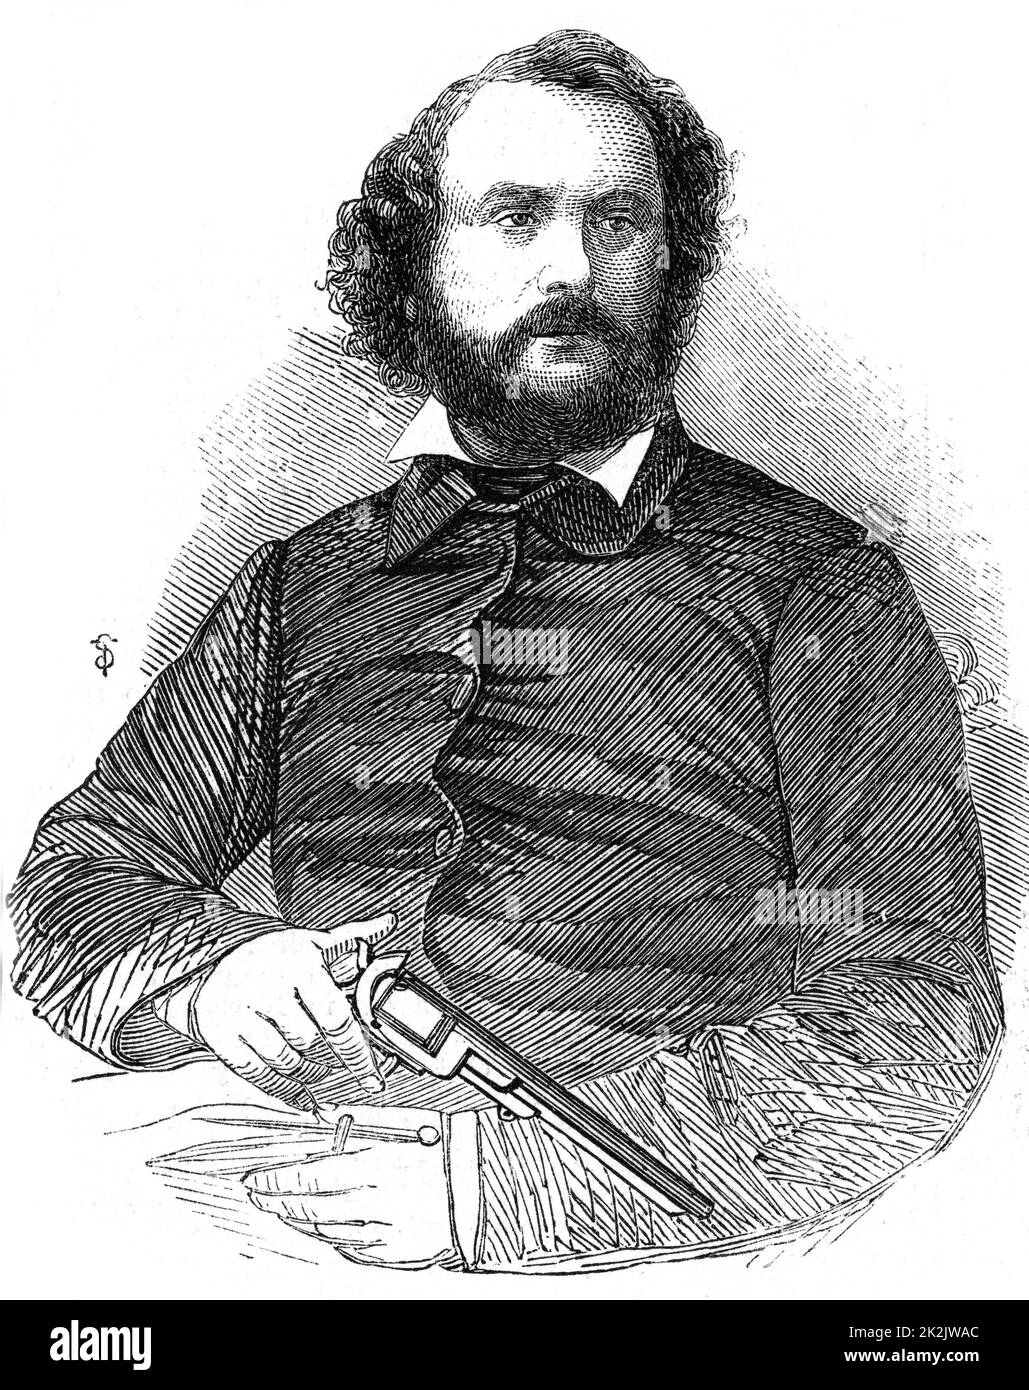 Samuel Colt (1814-1862), American inventor and industrialist, shown here with the Colt revolver, the weapon which, after the Mexican war of 1846-8, was adopted by the US army. From 'The Illustrated London News', 22 November 1856. Wood engraving Stock Photo